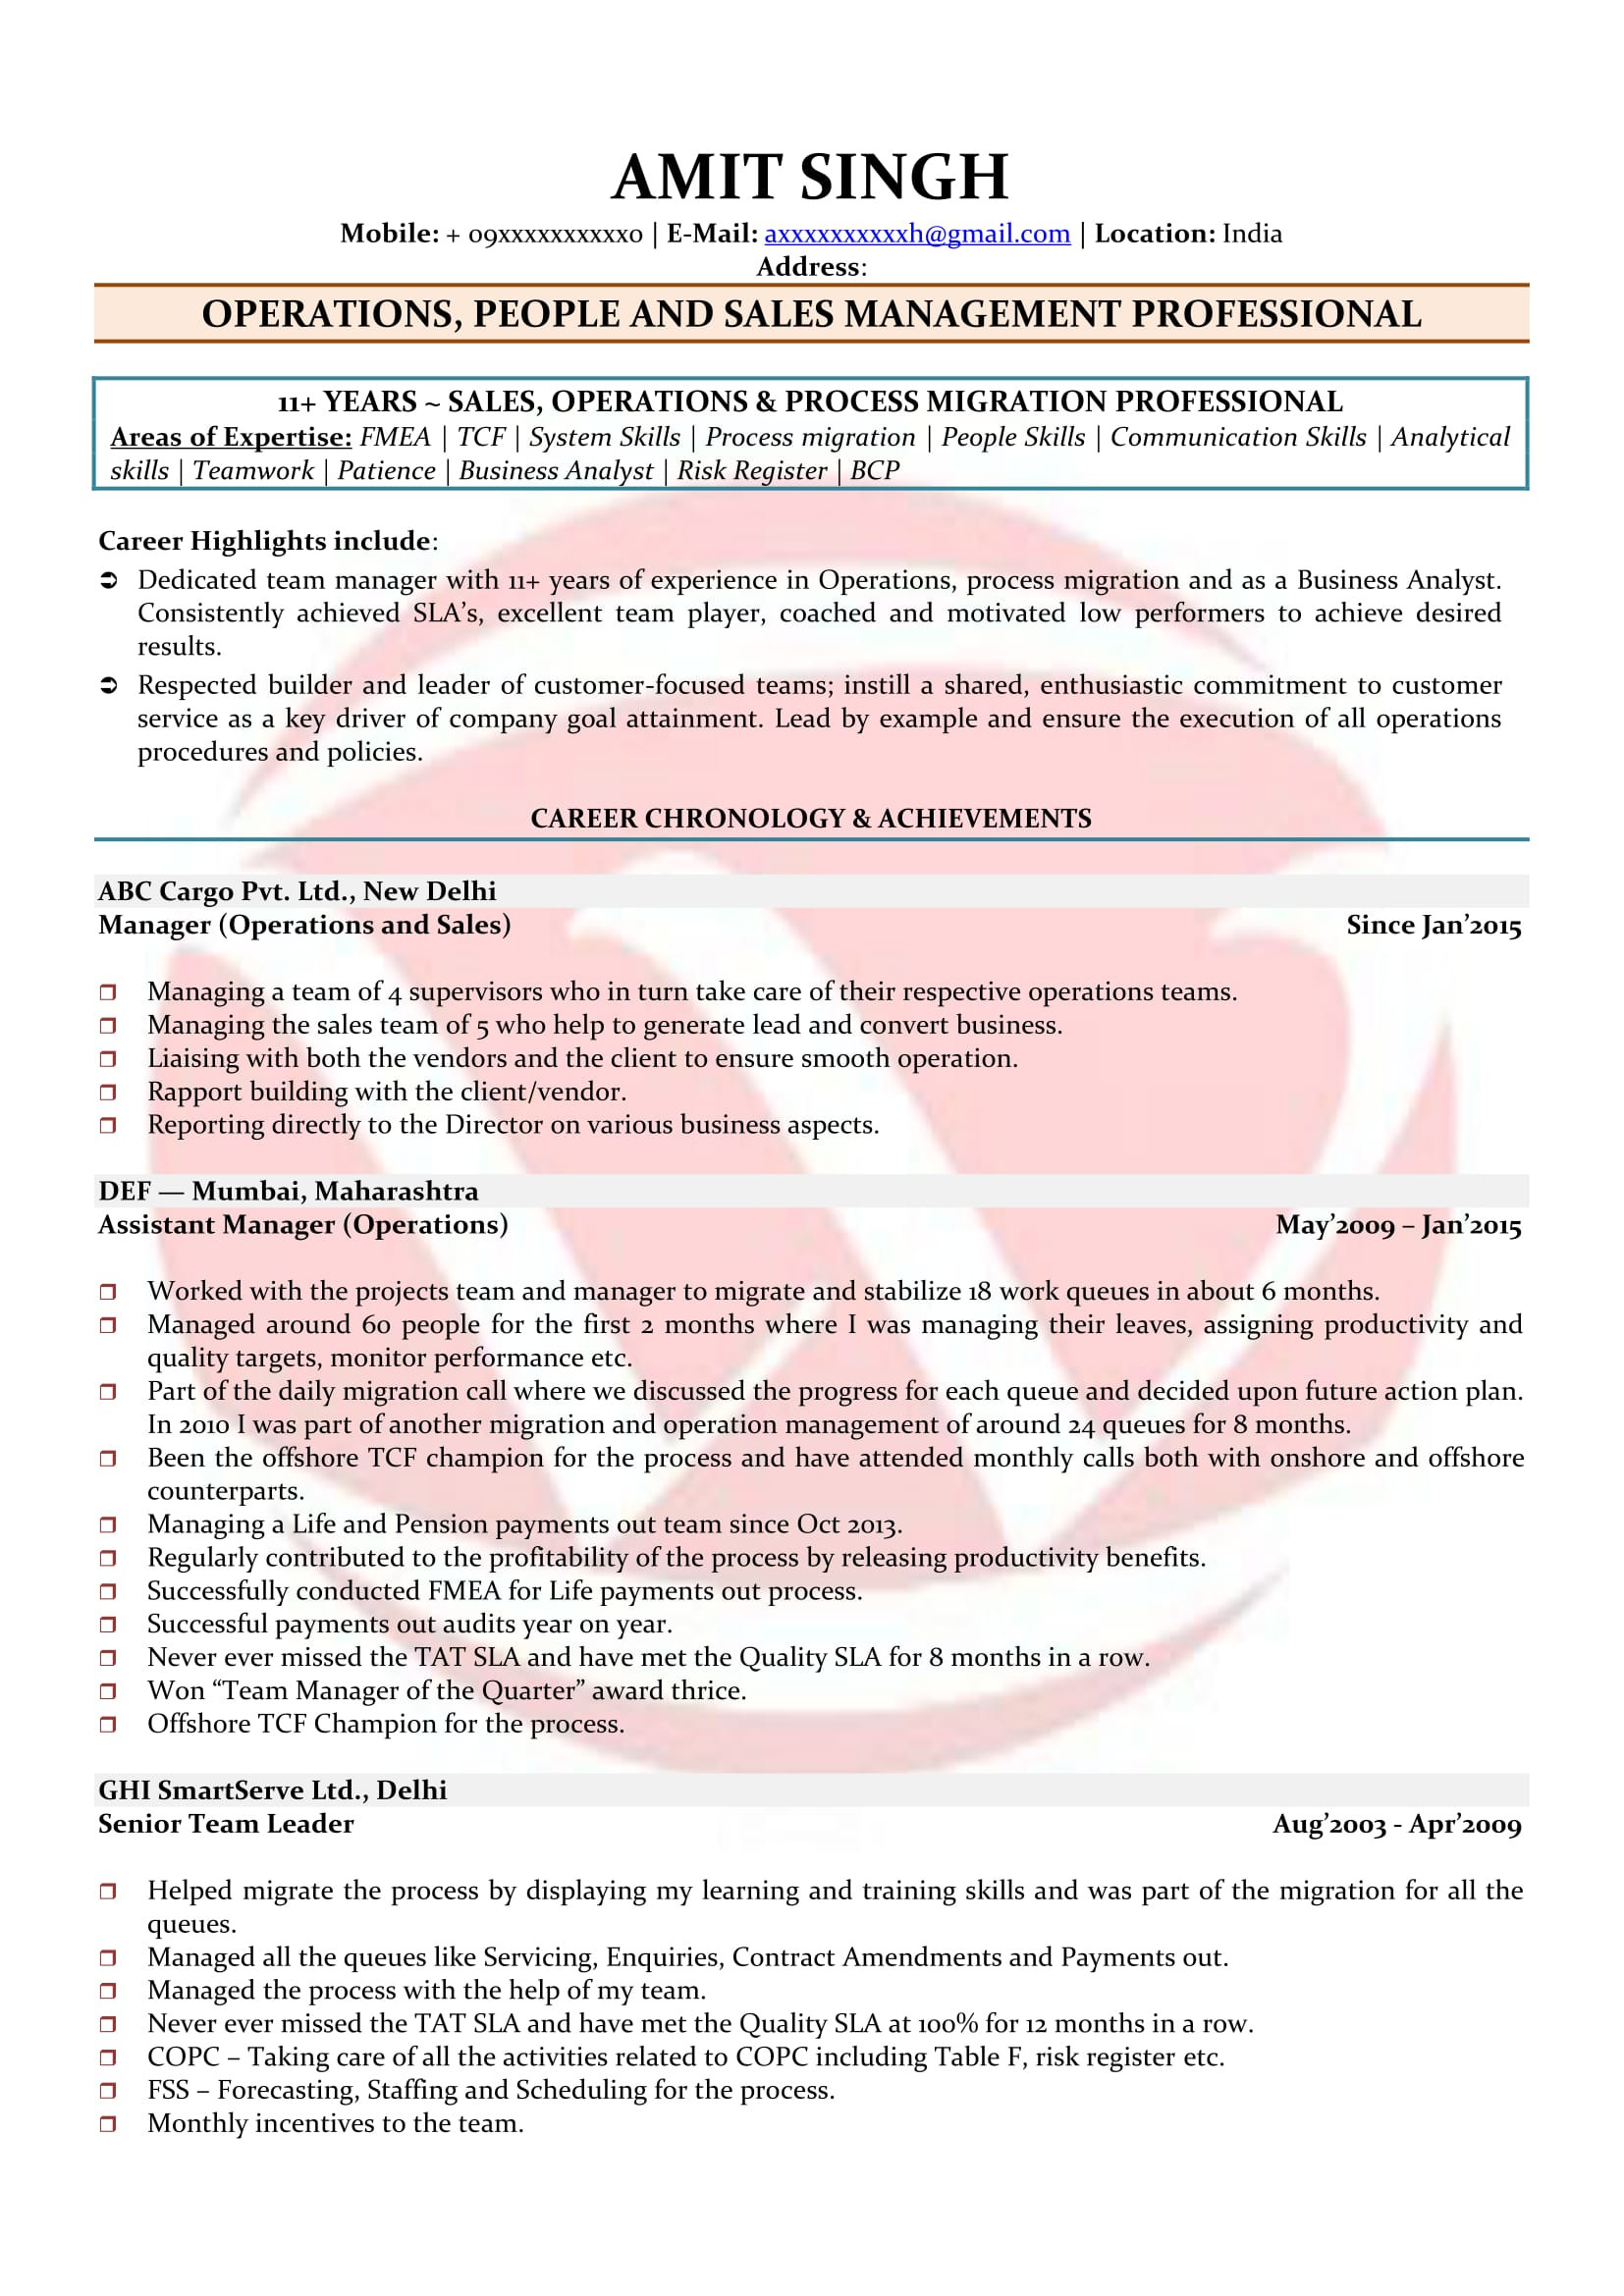 Sample Resume for Mutual Fund Operations In India People Management Sample Resumes, Download Resume format Templates!